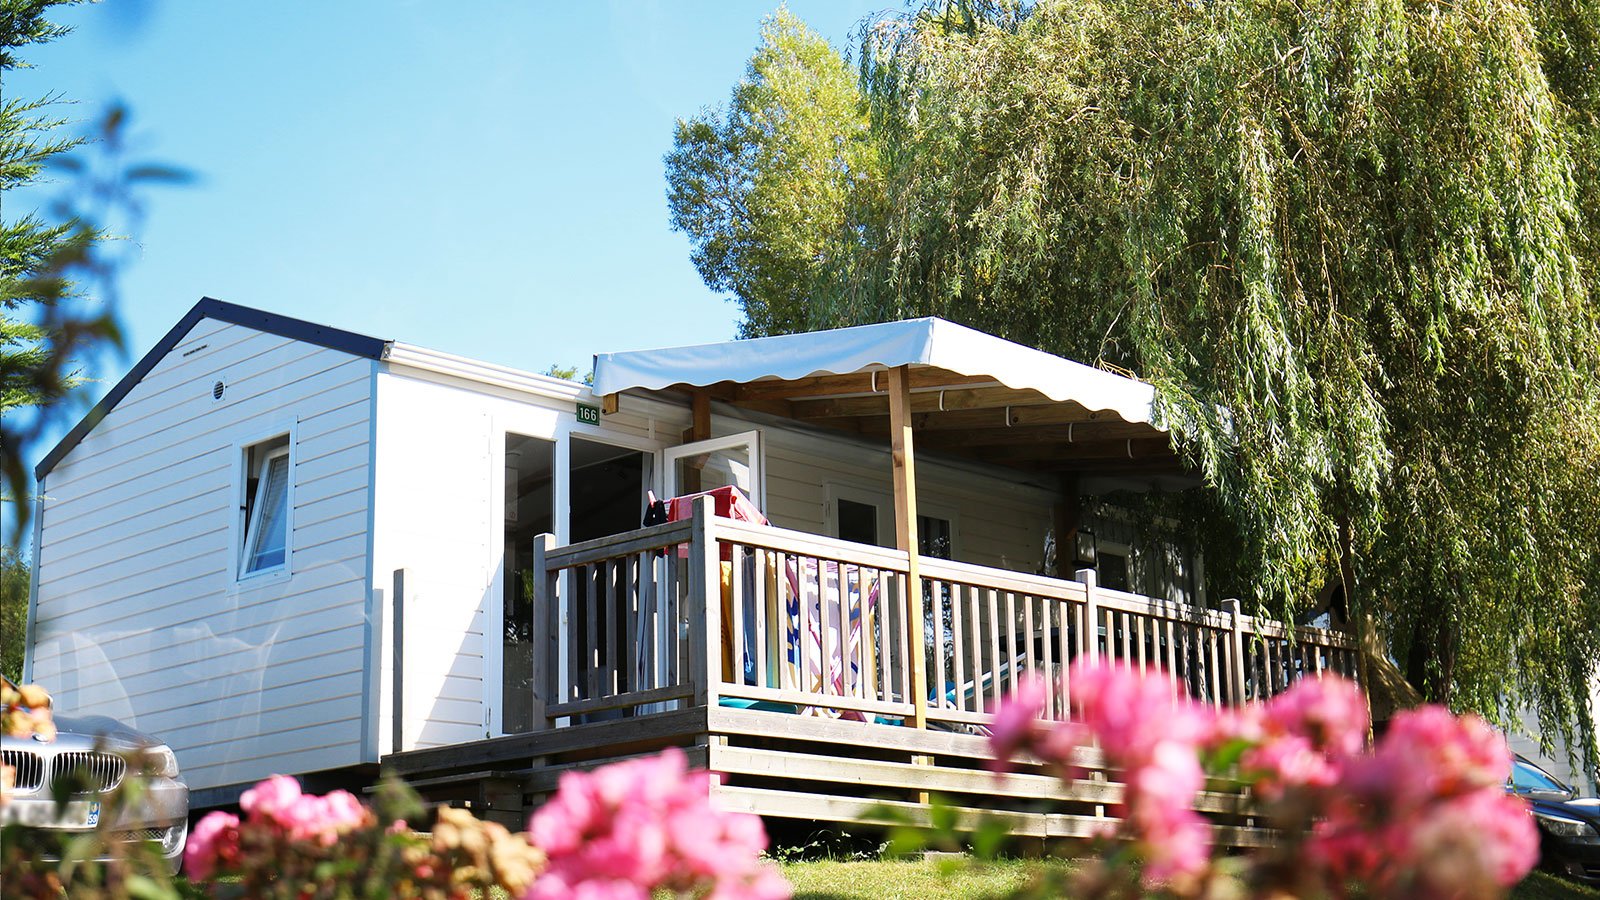 (c) Camping-deauville.com